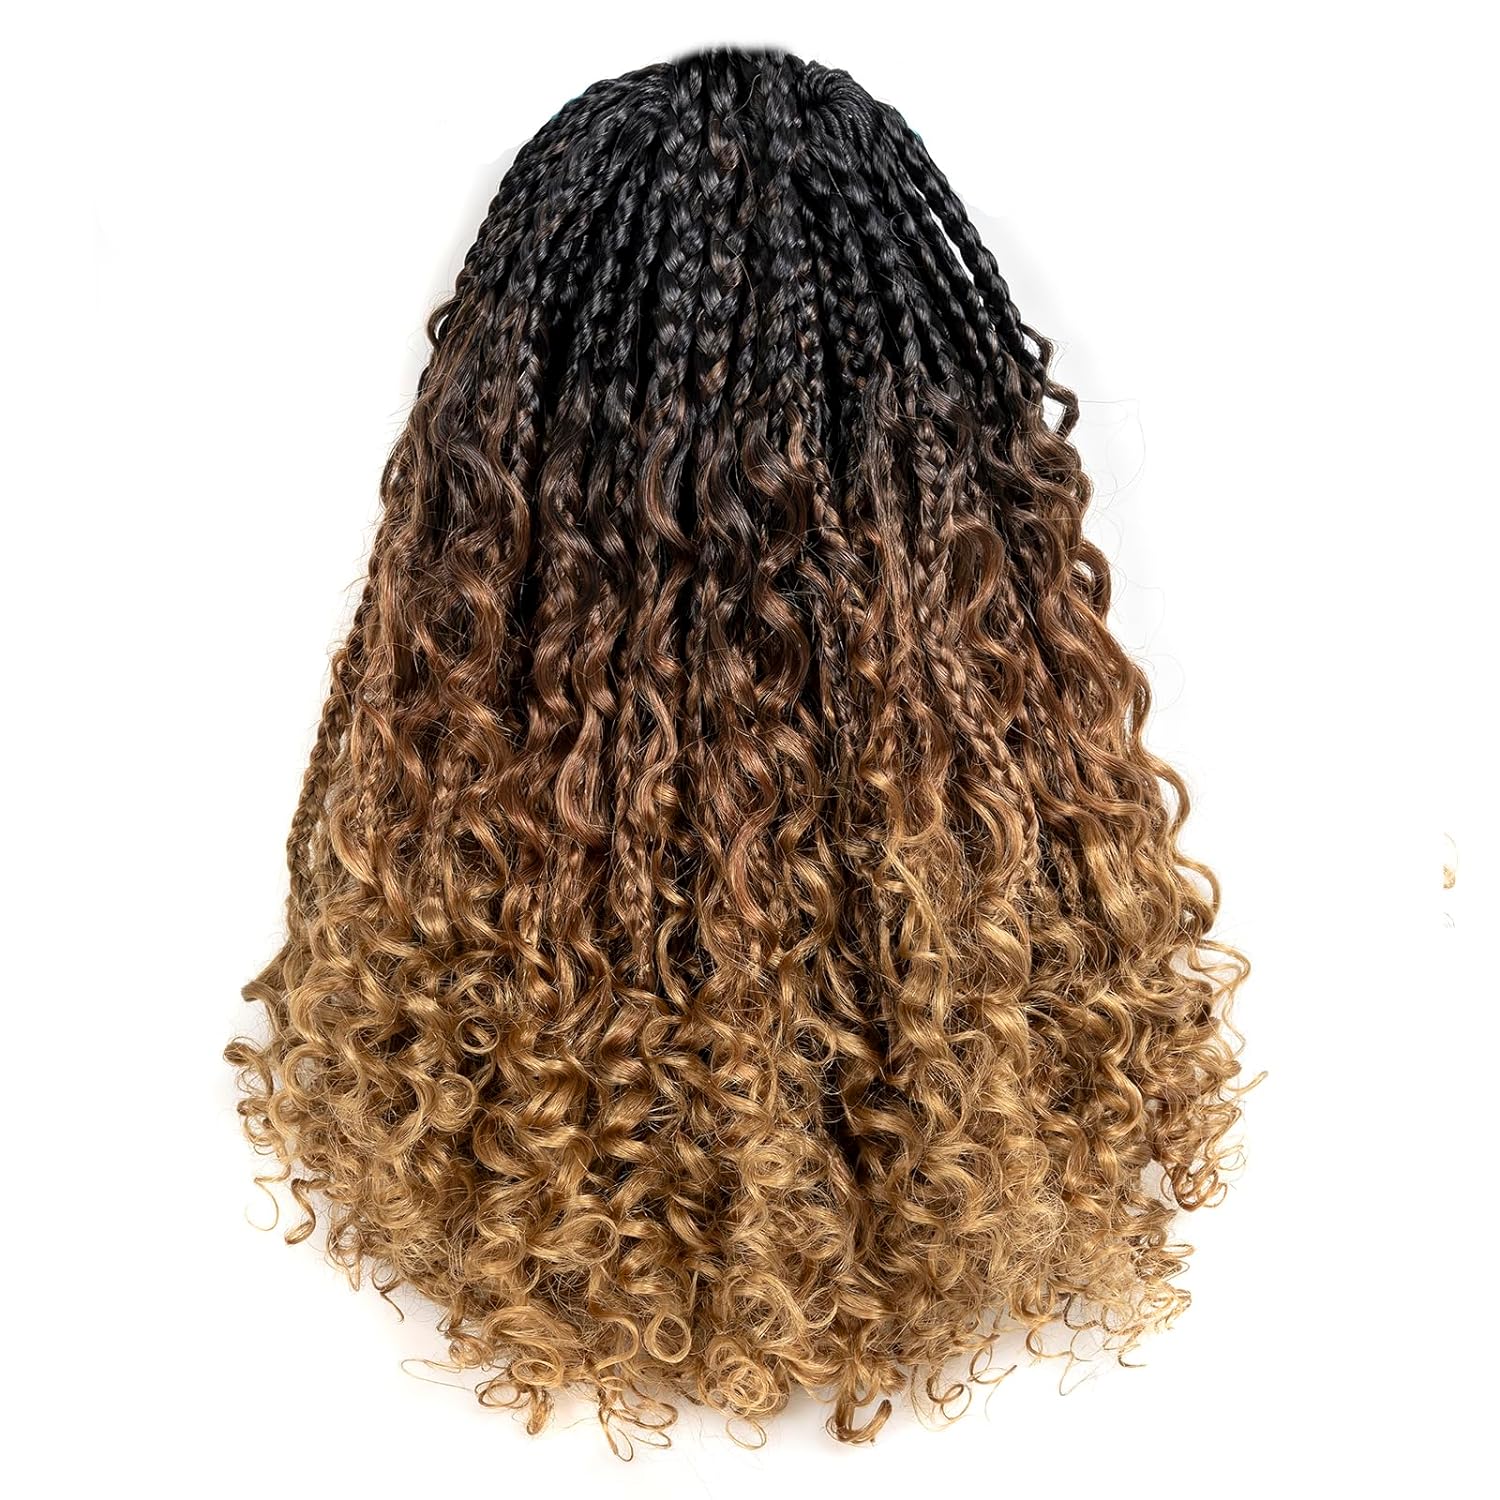 FAST SHIPPING 3-5 DAY GBB | ToyoTress Bohemian Box Braids Crochet Hair - 10 Inch 8 Packs Ombre Brown Blonde Box Braids Crochet Hair Curly End Crochet Braids, Short Pre-looped Synthetic Braidsing Hair Extensions